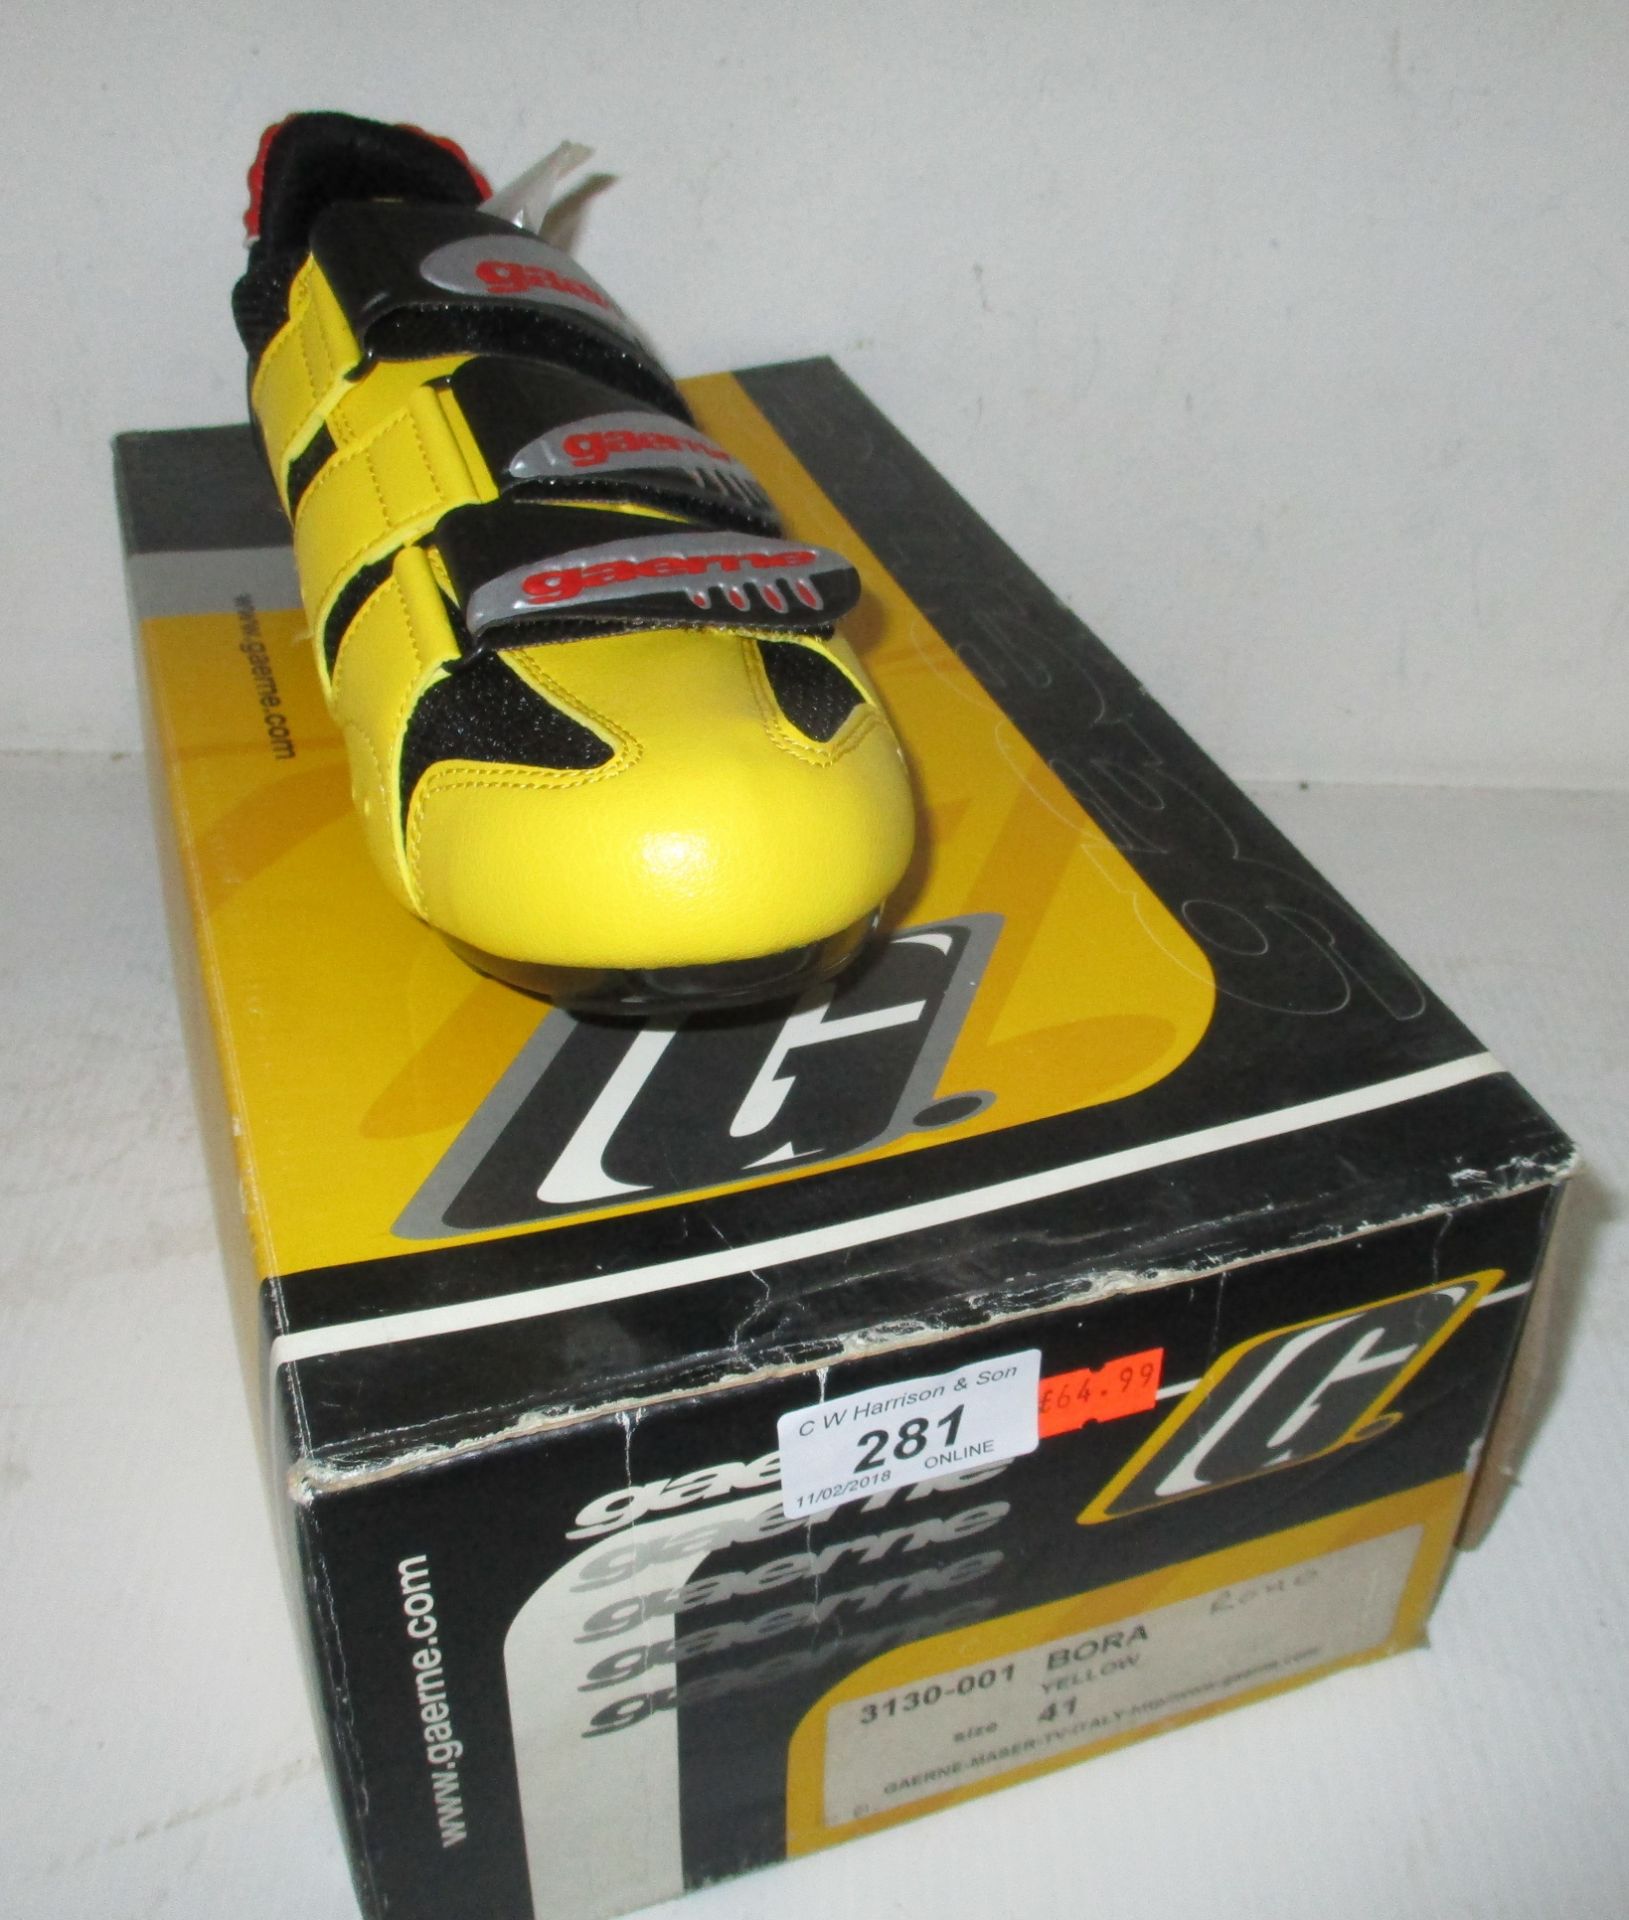 A pair of Gaerne Bora cycling shoes in yellow size 41